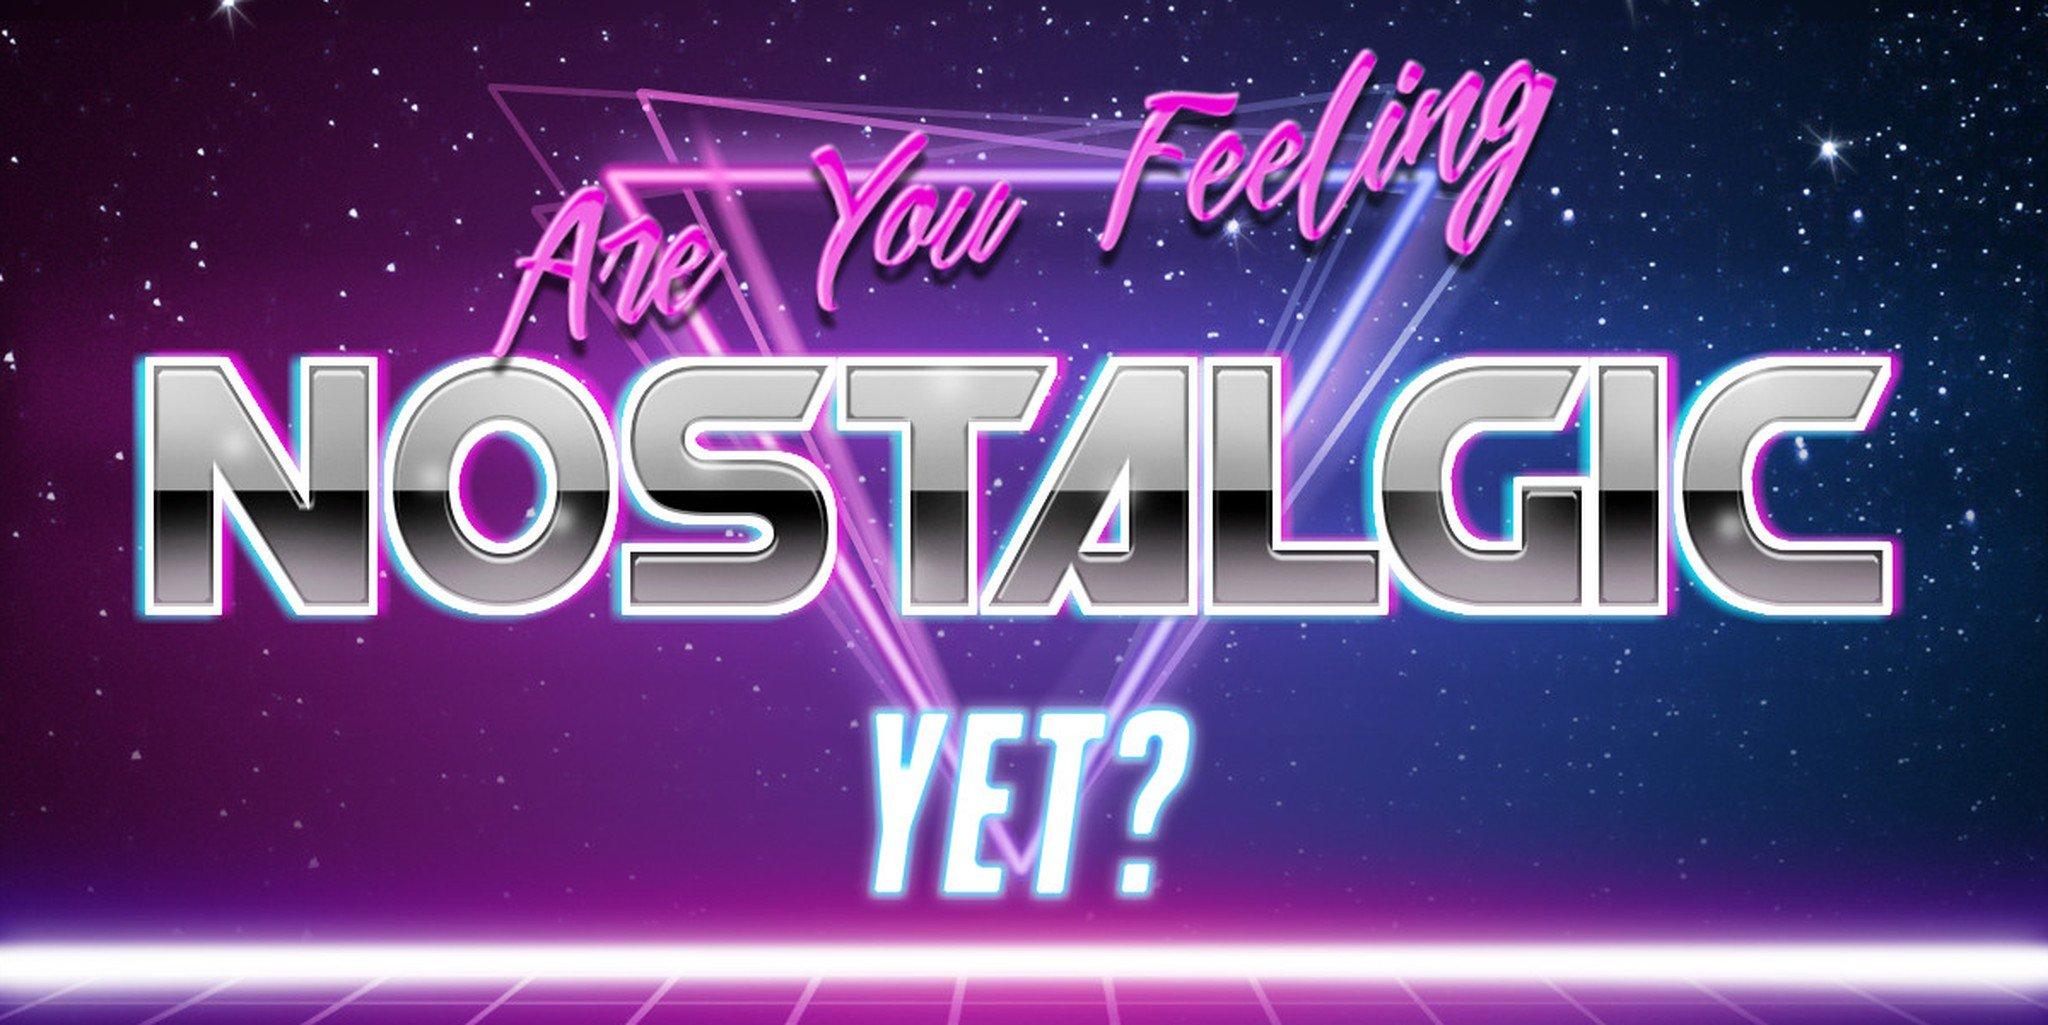 This '80s Aesthetic Text Generator Is Pretty Rad and Totally Free